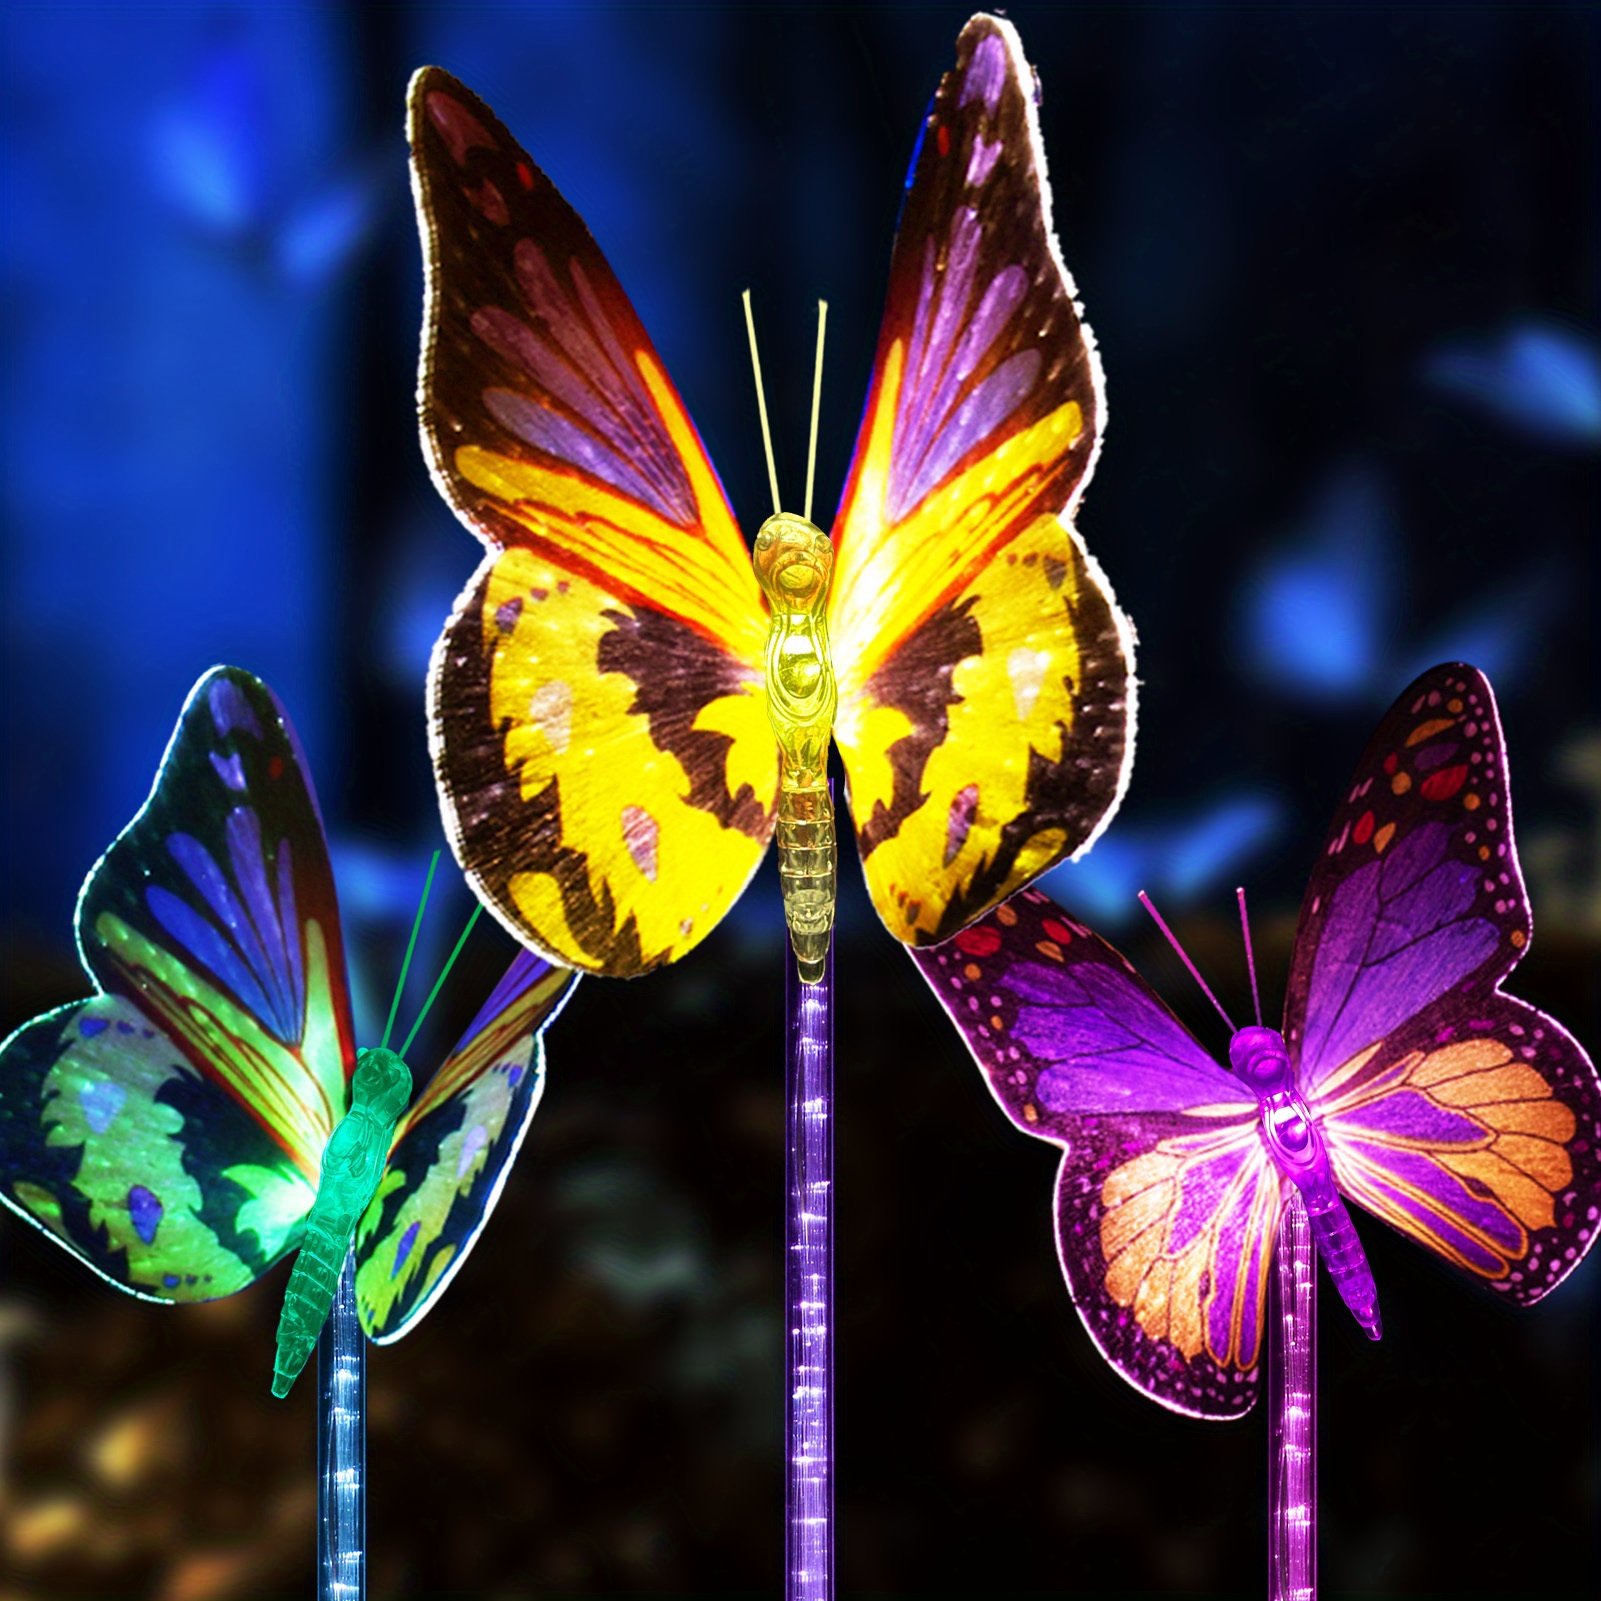 Solar Garden Lights - 3 Pack Solar Stake Light, Color Changing Solar  Powered Decorative Landscape Lighting Hummingbird Butterfly Dragonfly for  Outdoor